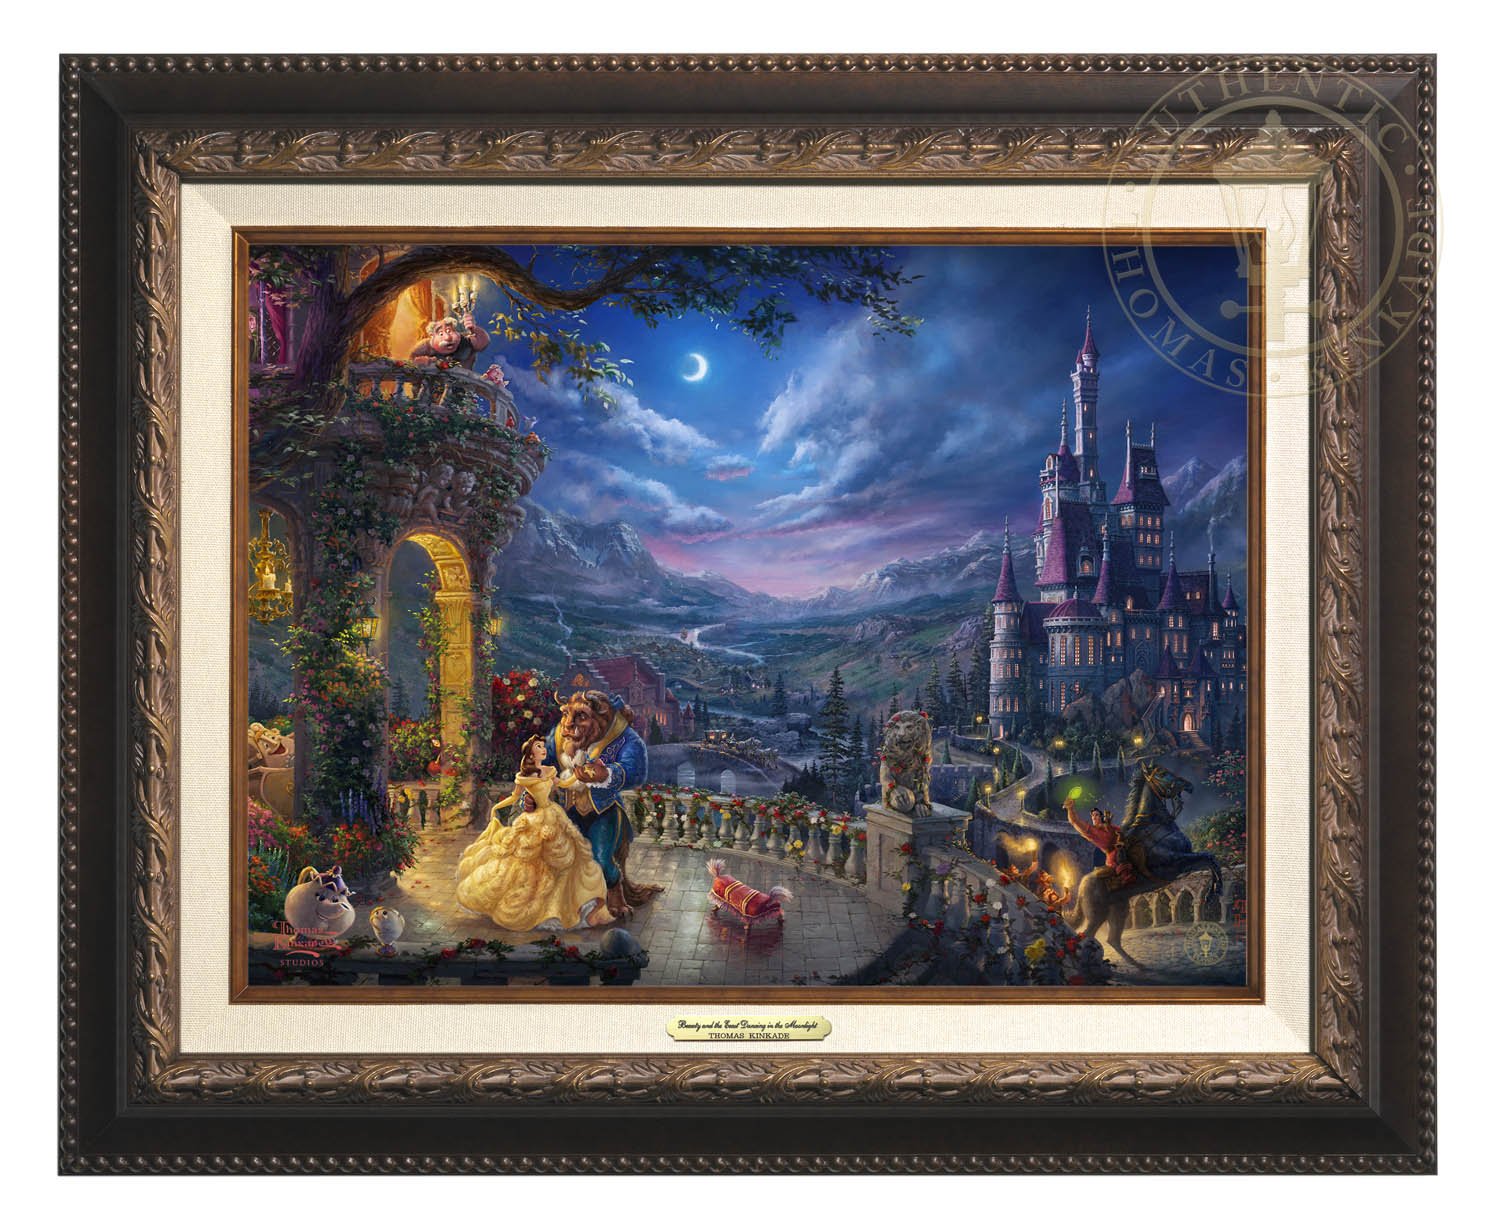 Belle and the Beast celebrate their love under the dreamy moonlit sky, with all their friend enjoying the moments - Aged Bronze Frame